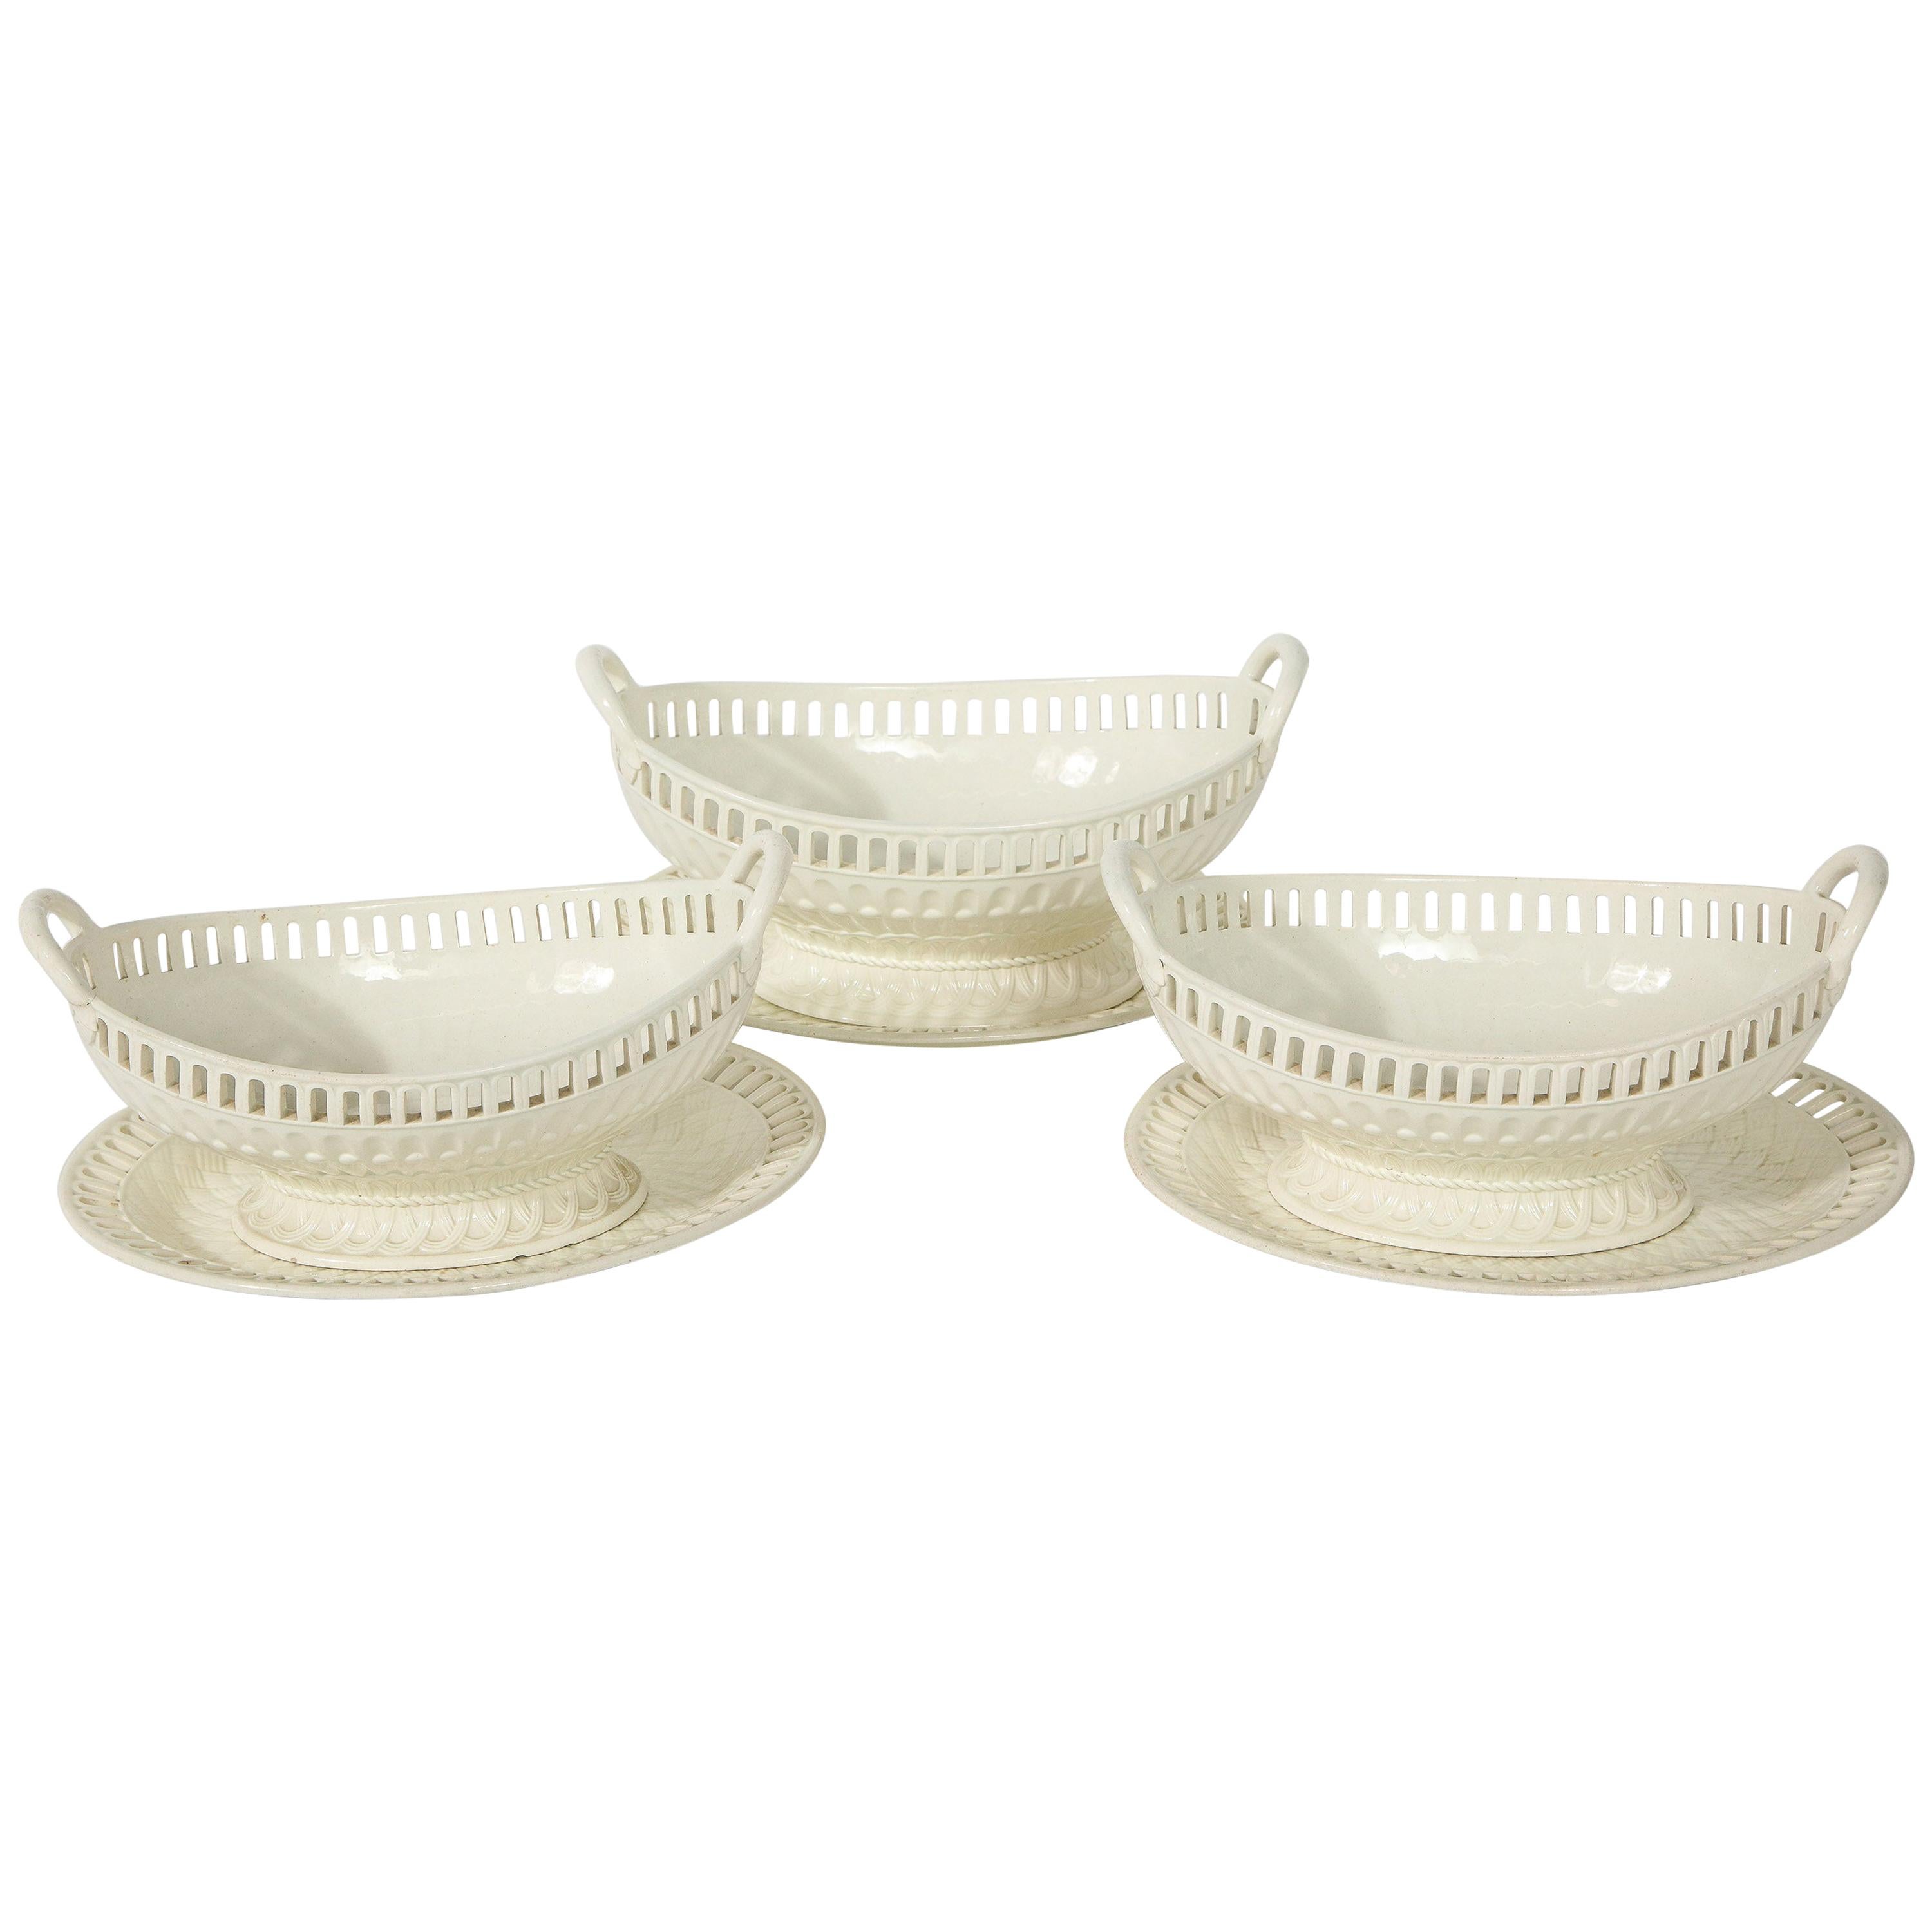 3 Wedgwood Bowls For Sale